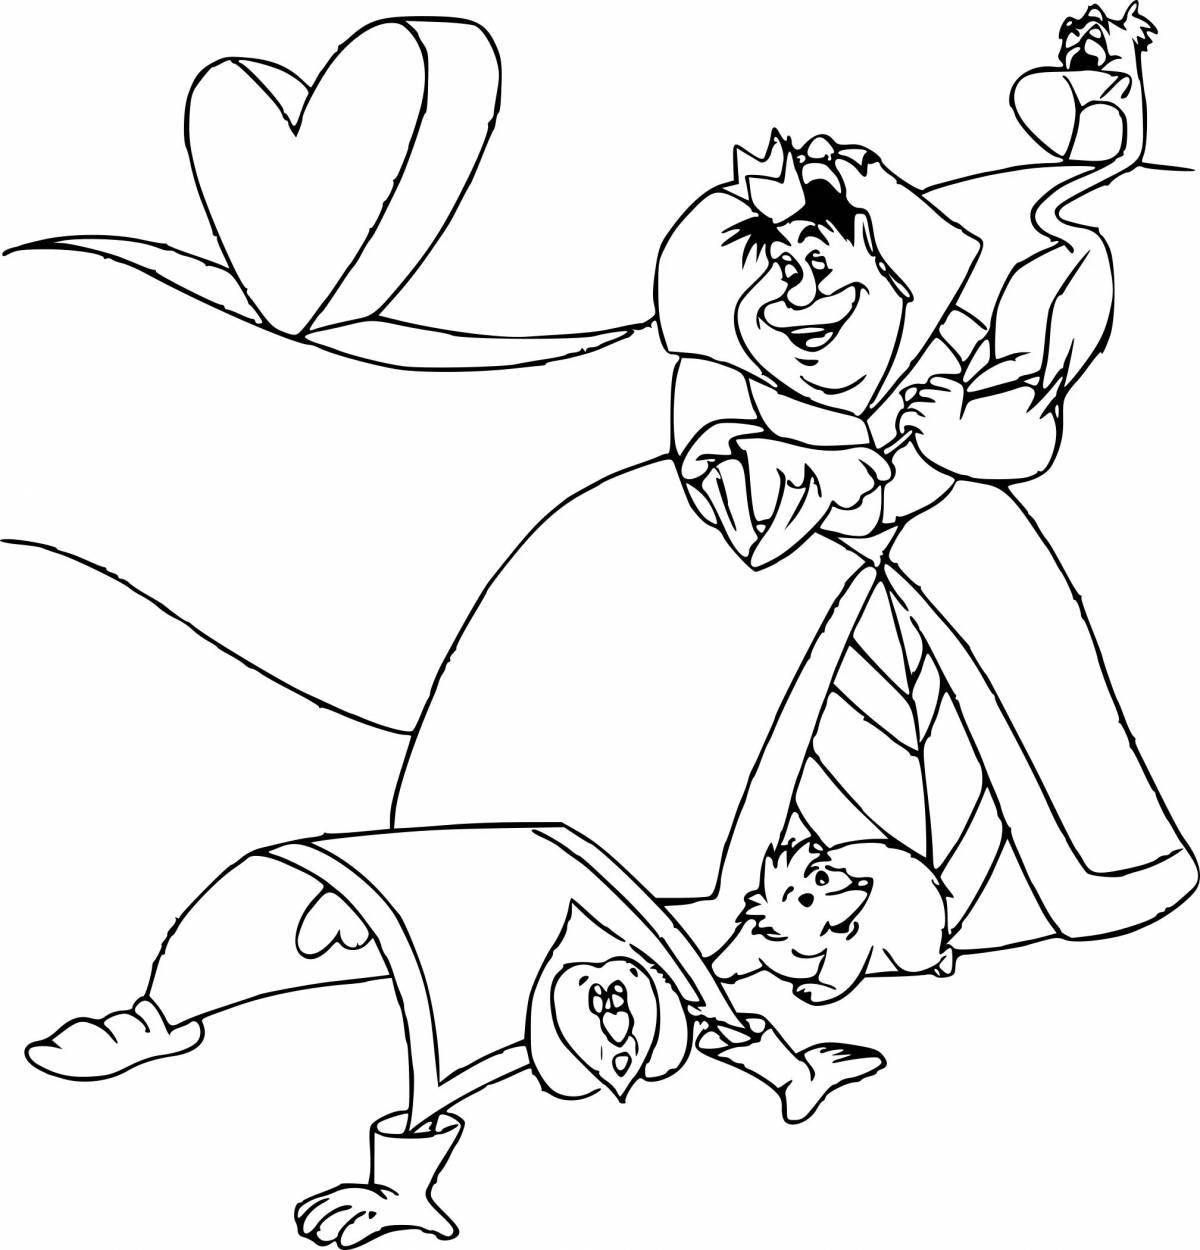 The shining alice in wonderland disney coloring page